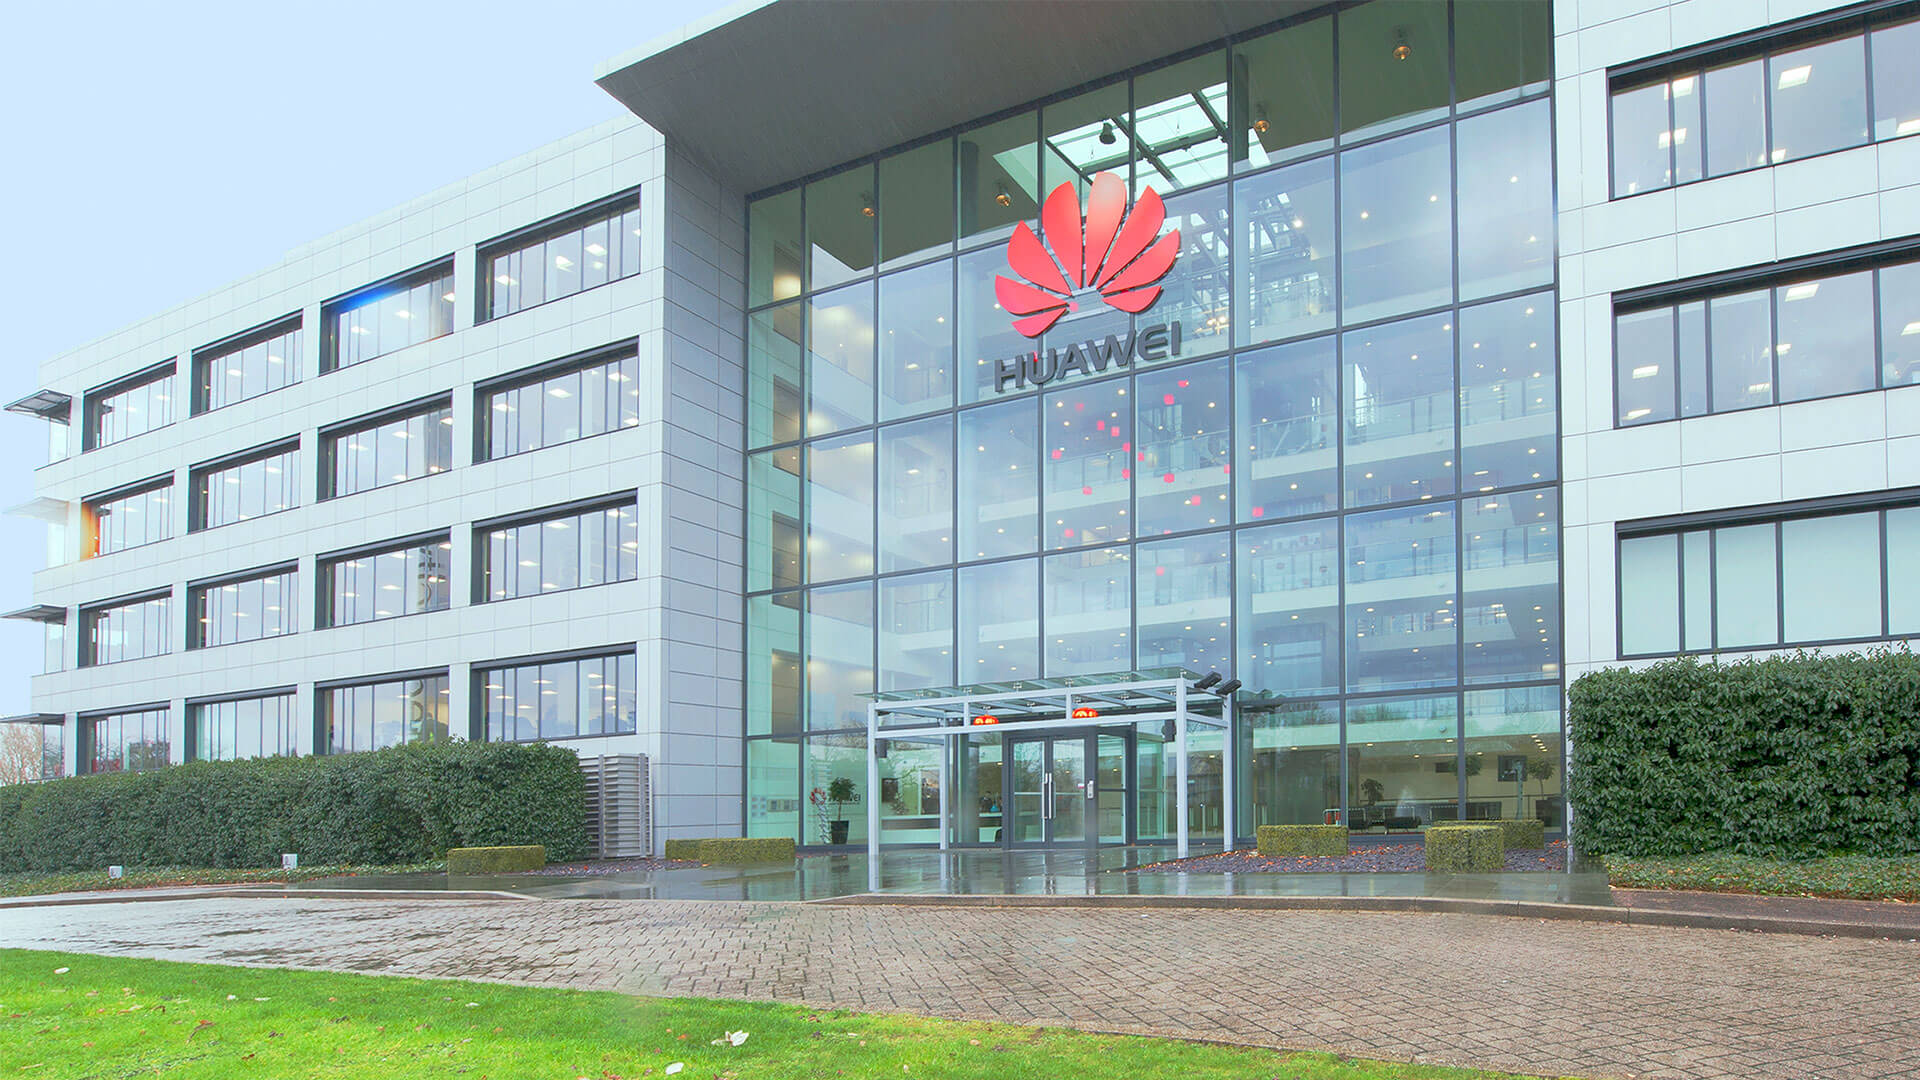 UK should face ‘public and painful’ retaliation over Huawei decision, Chinese state media urges